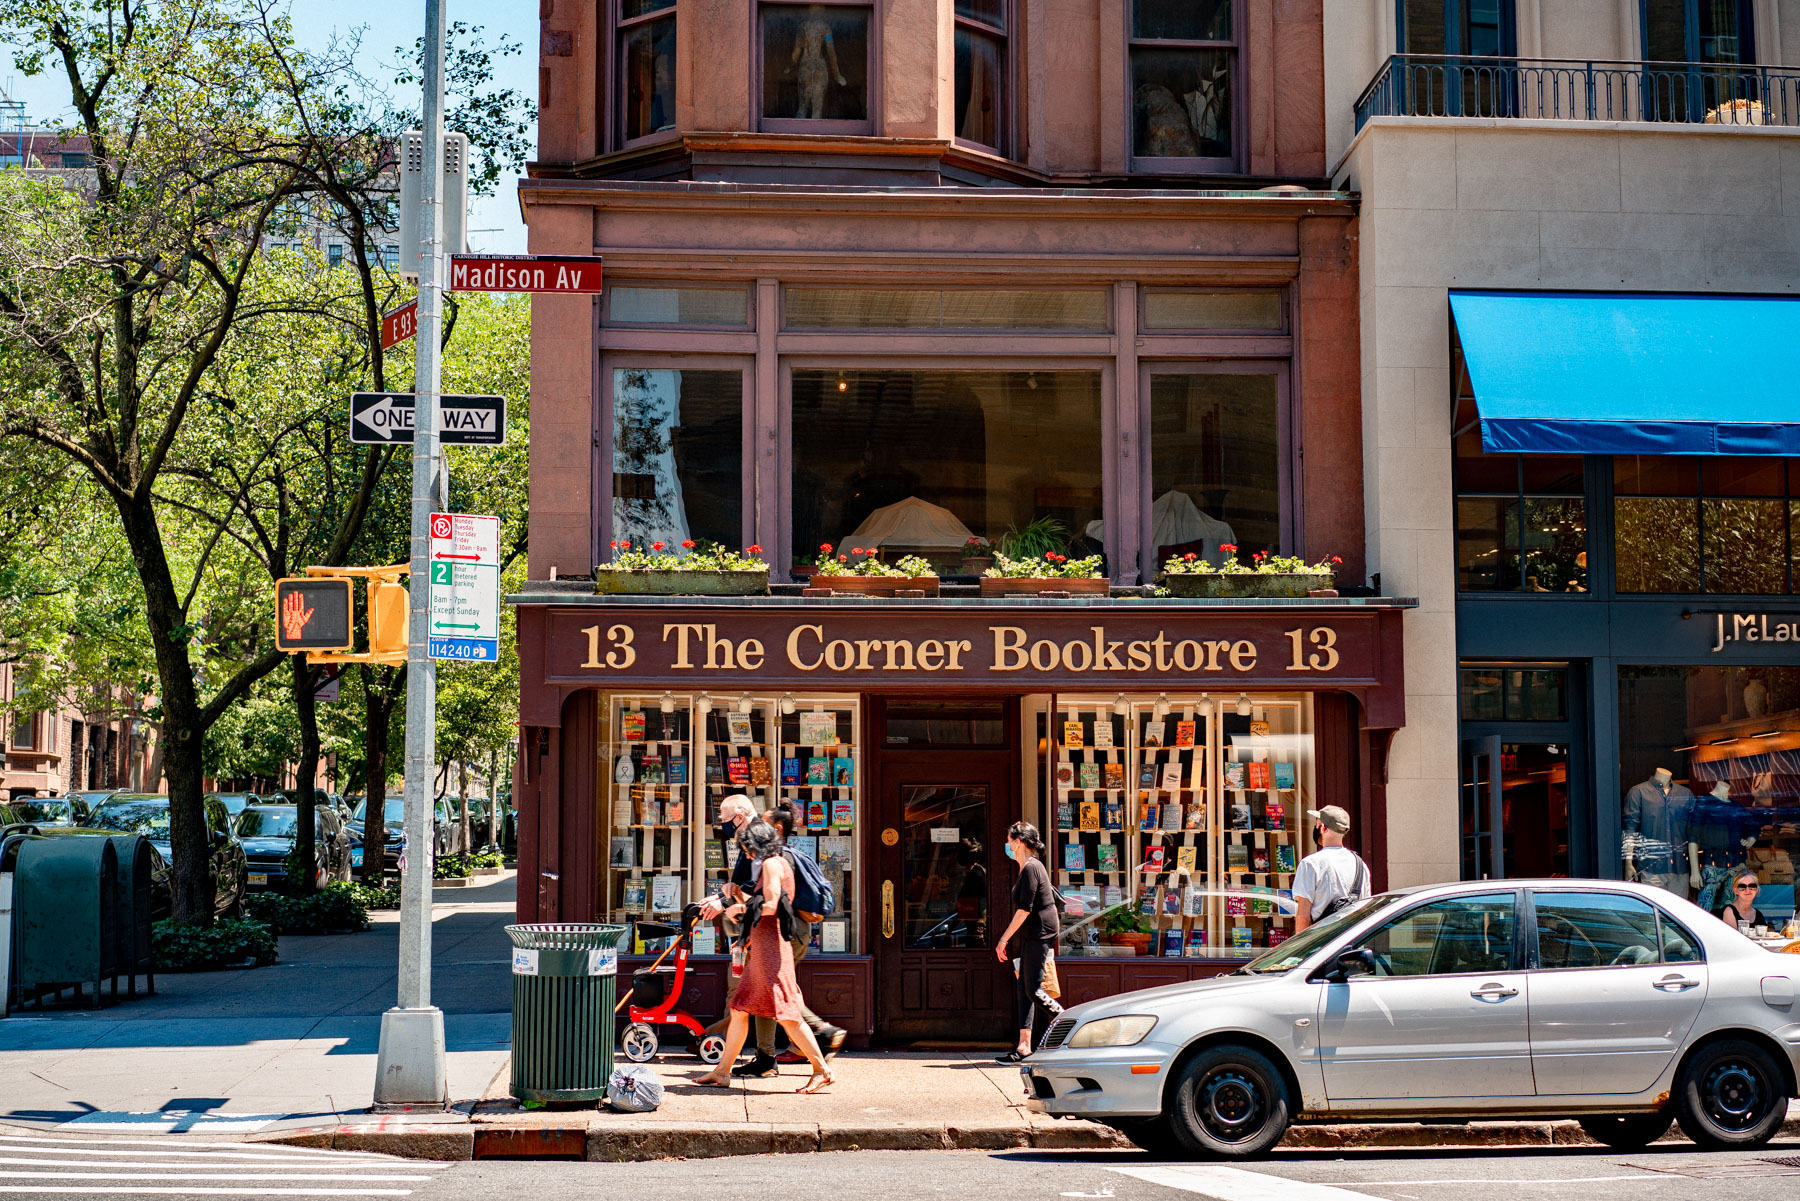 cute bookstores nyc
the Corner Bookstore NYC
You've Got Mail bookstore